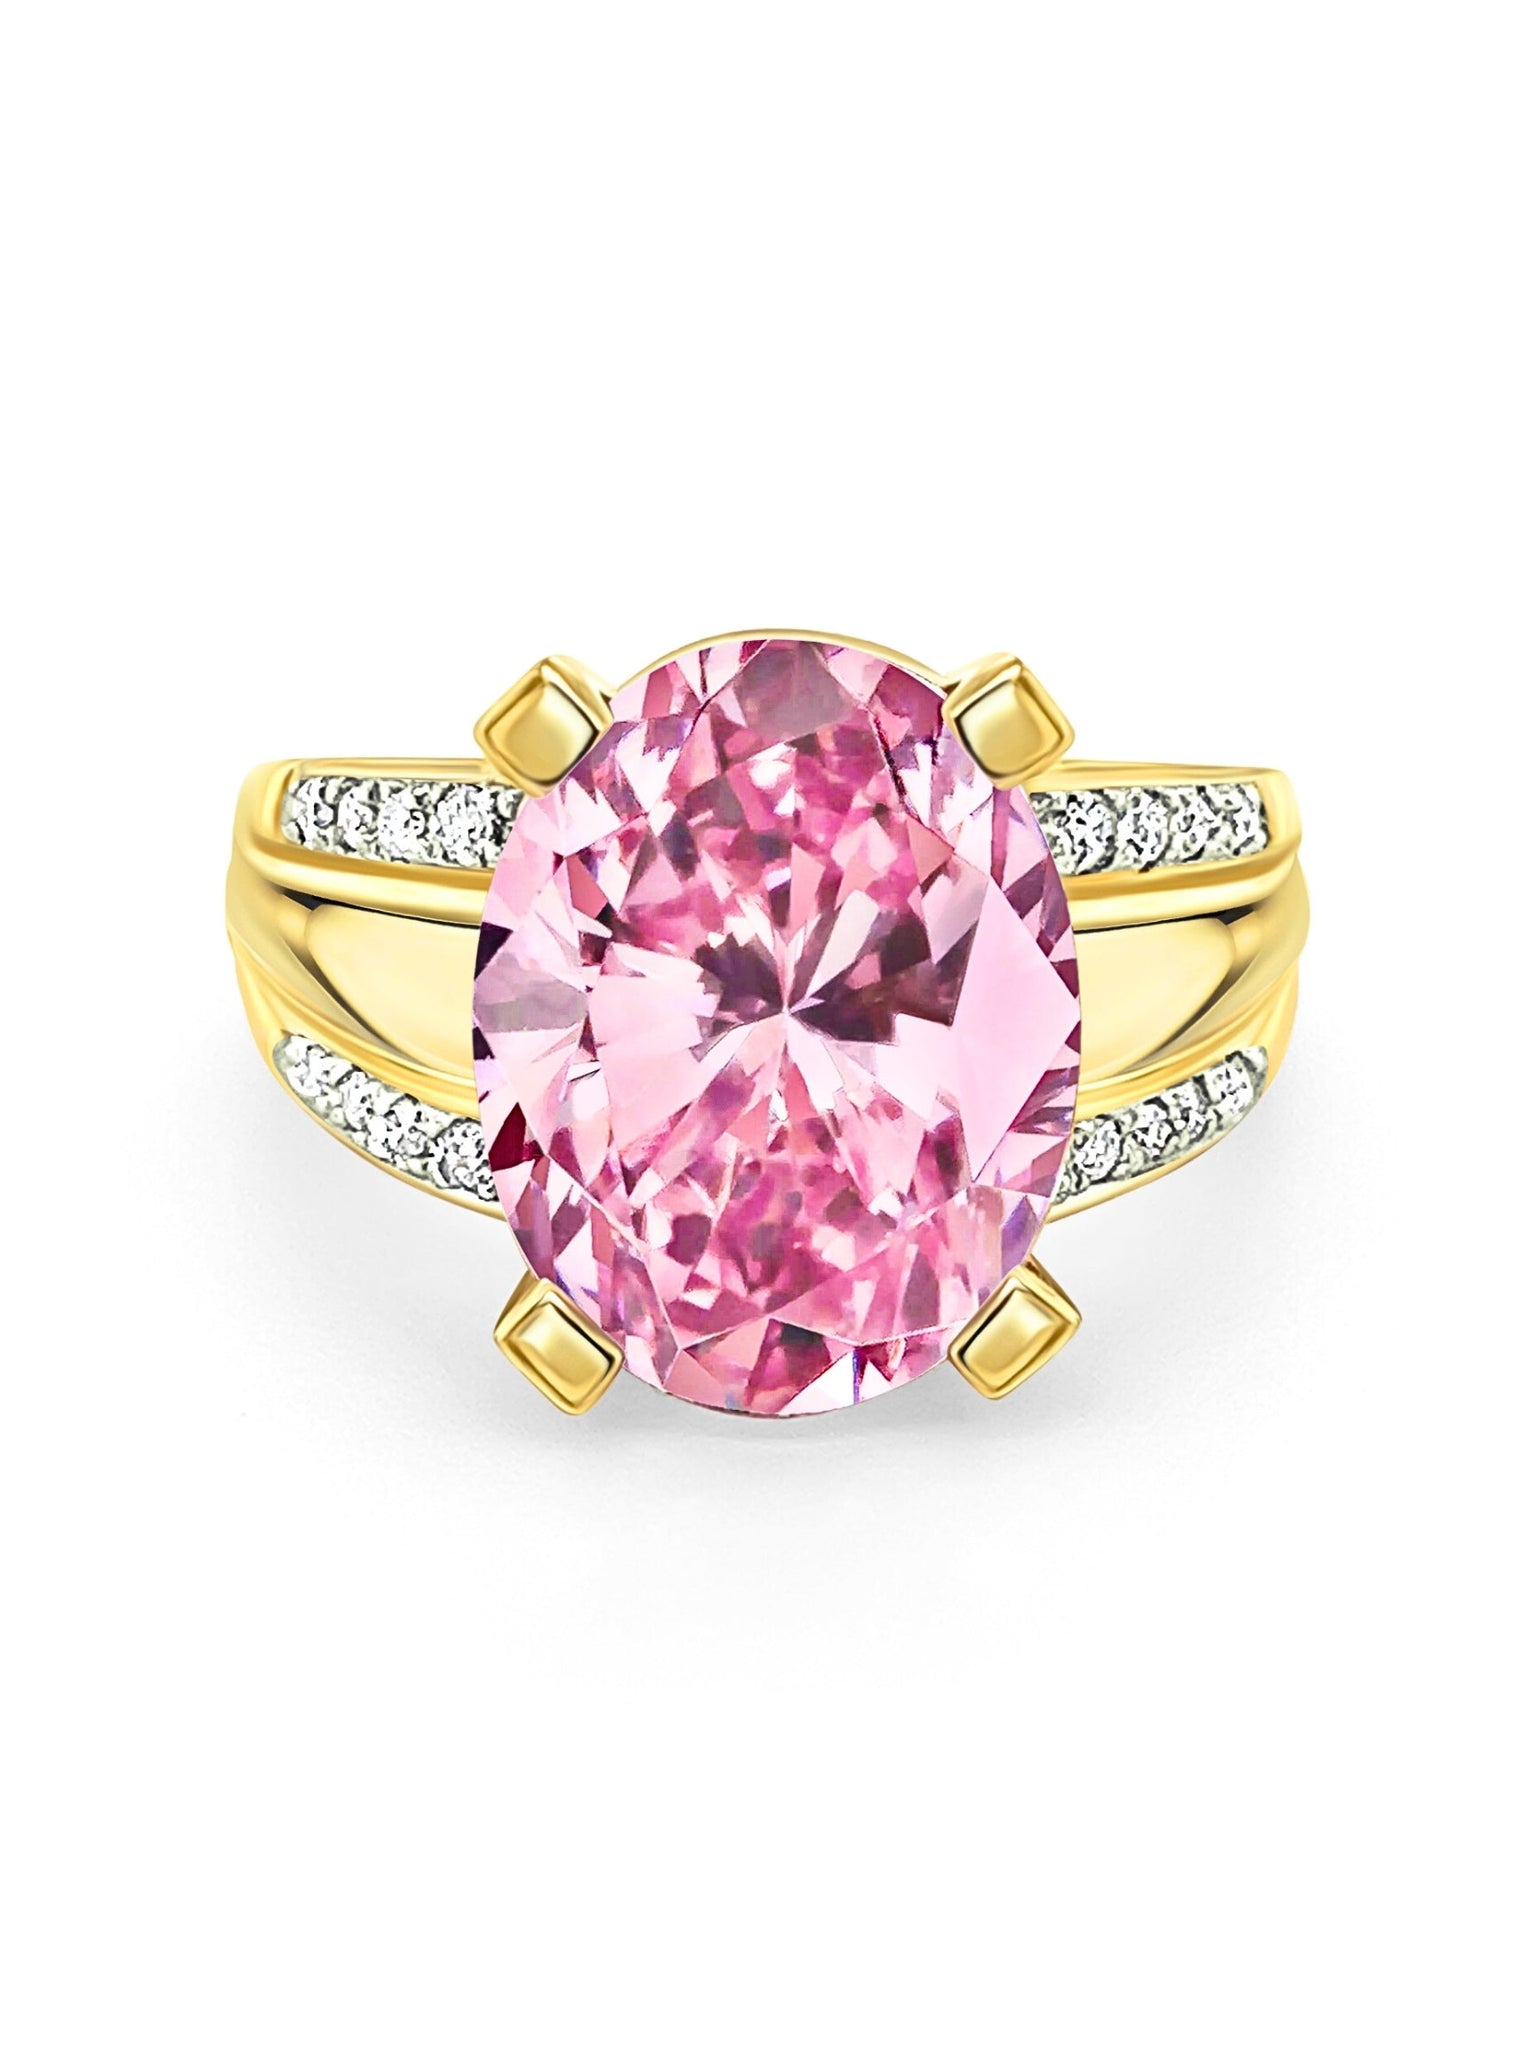 Vintage 9.50 Carat Oval Cut Pink Kunzite with Diamond Side Stone Cocktail Ring in 18K Yellow Gold